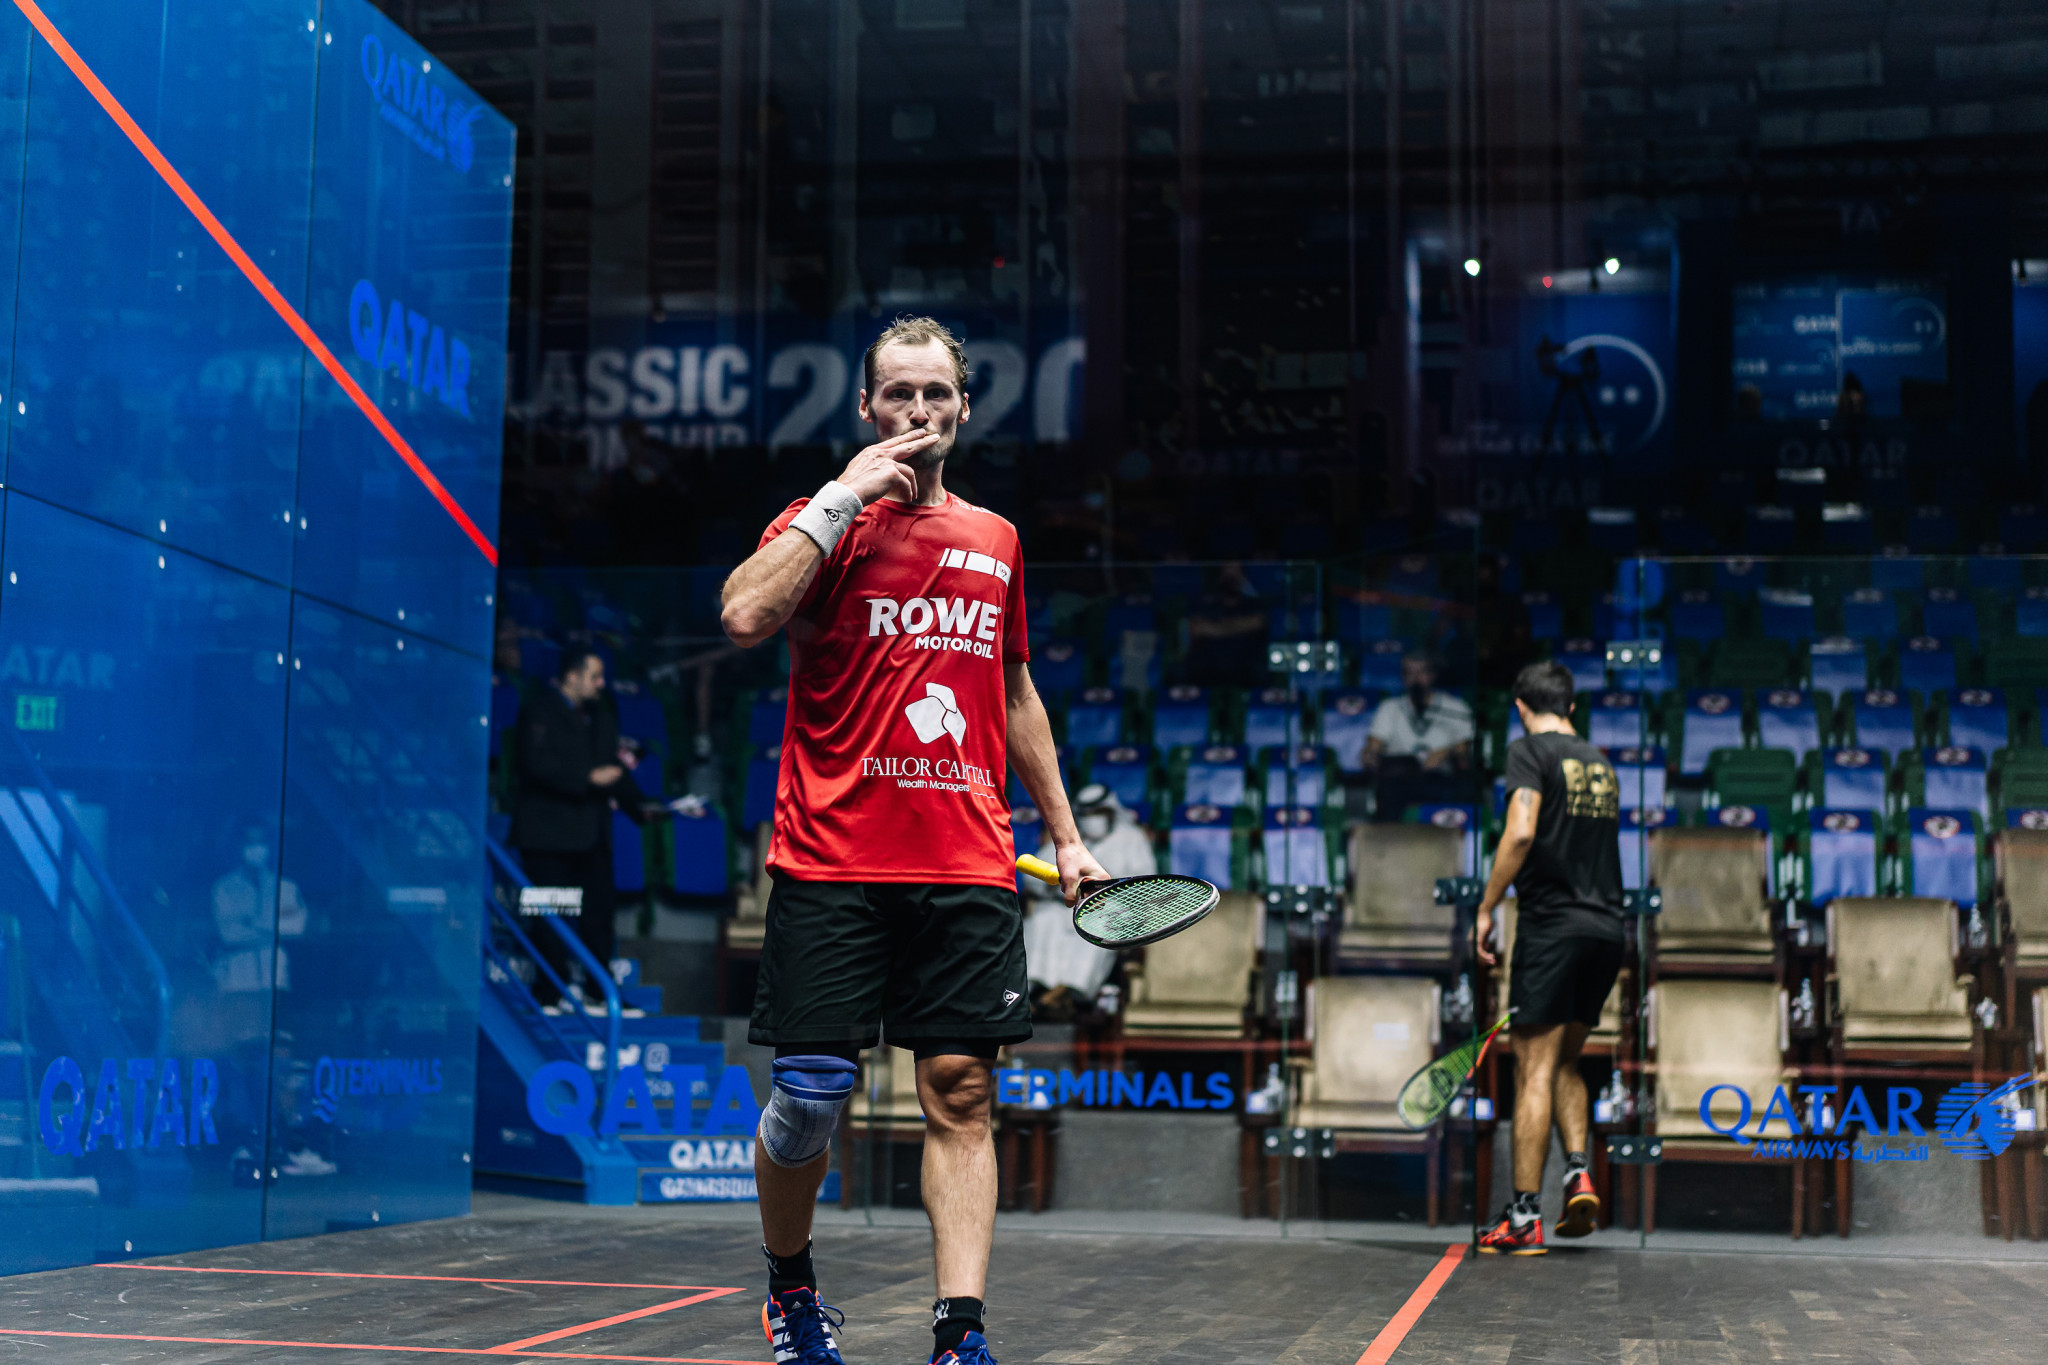 Former world number one Gregory Gaultier booked his place in the second round with victory over Spain's Iker Pejares ©PSA